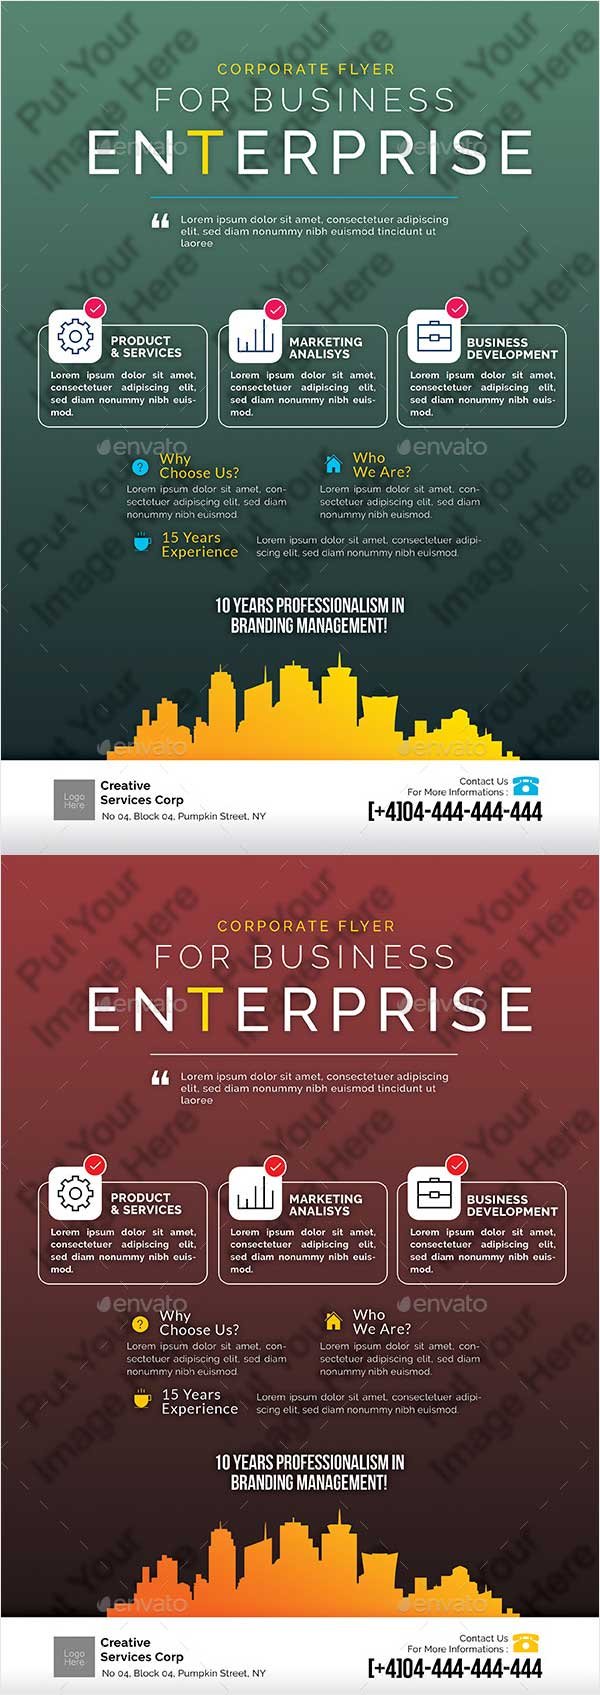 Business-Flyer-26